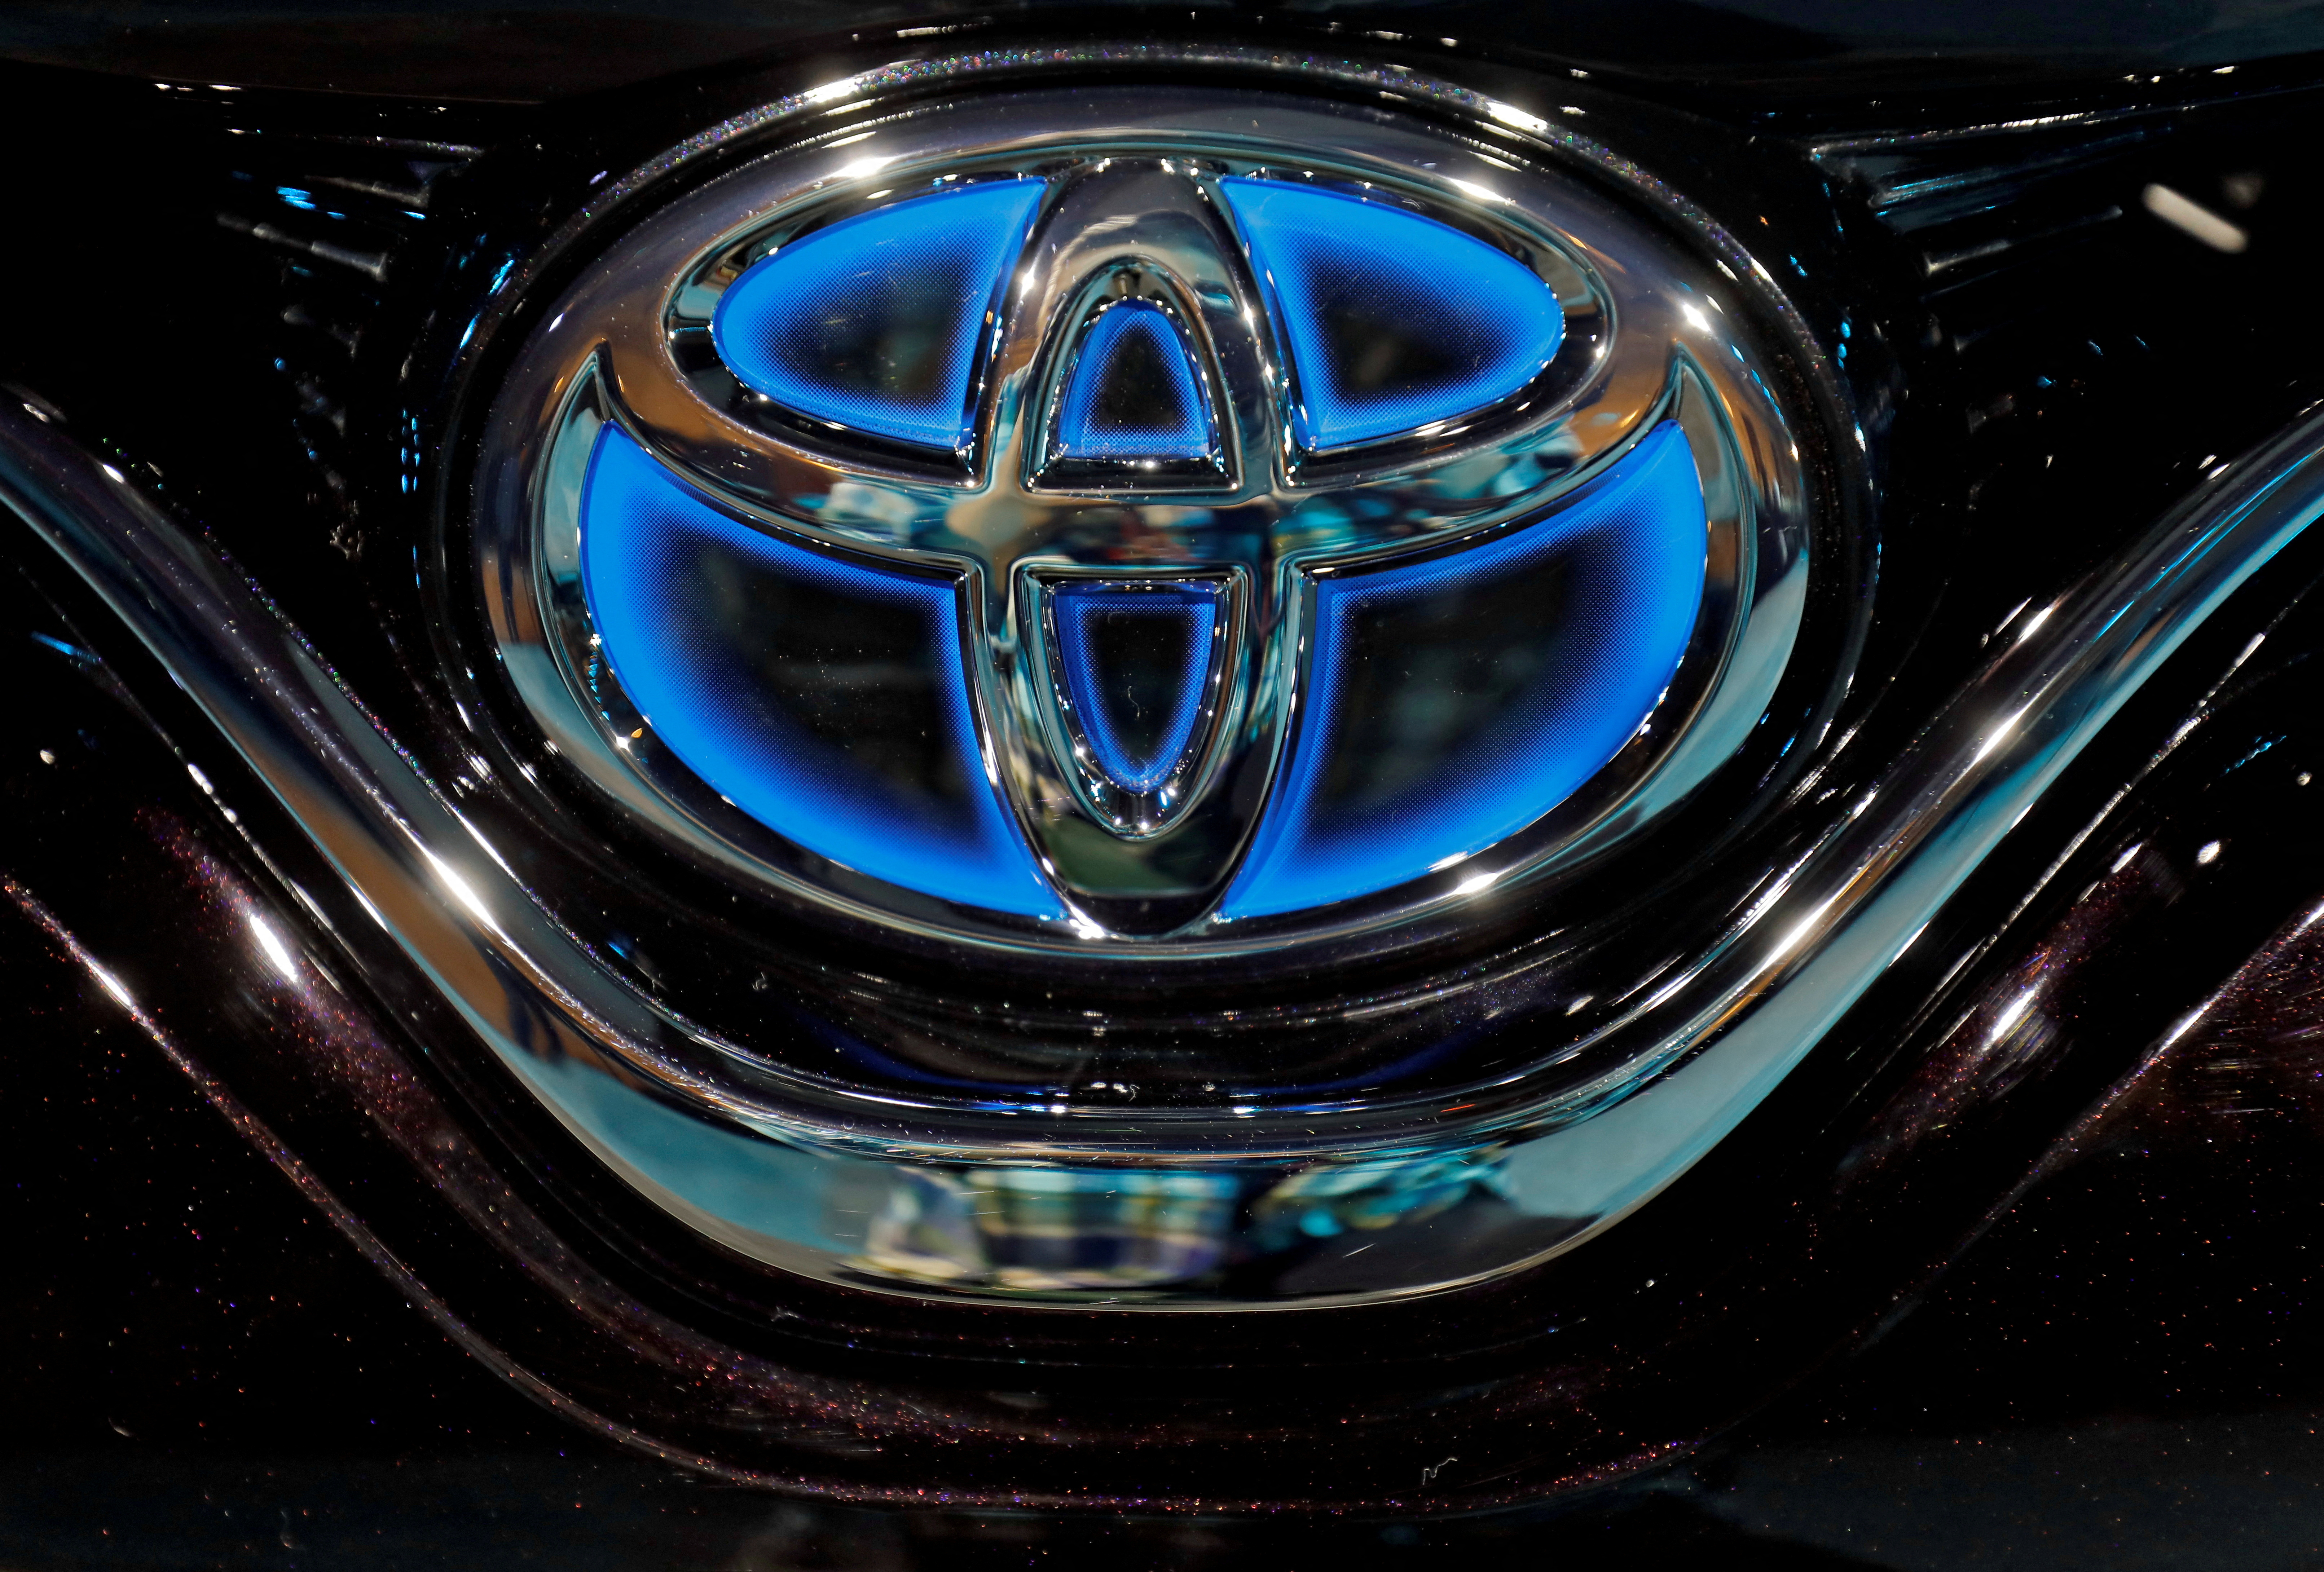 The Toyota logo is seen on a Camry Hybrid electric vehicle in New Delhi